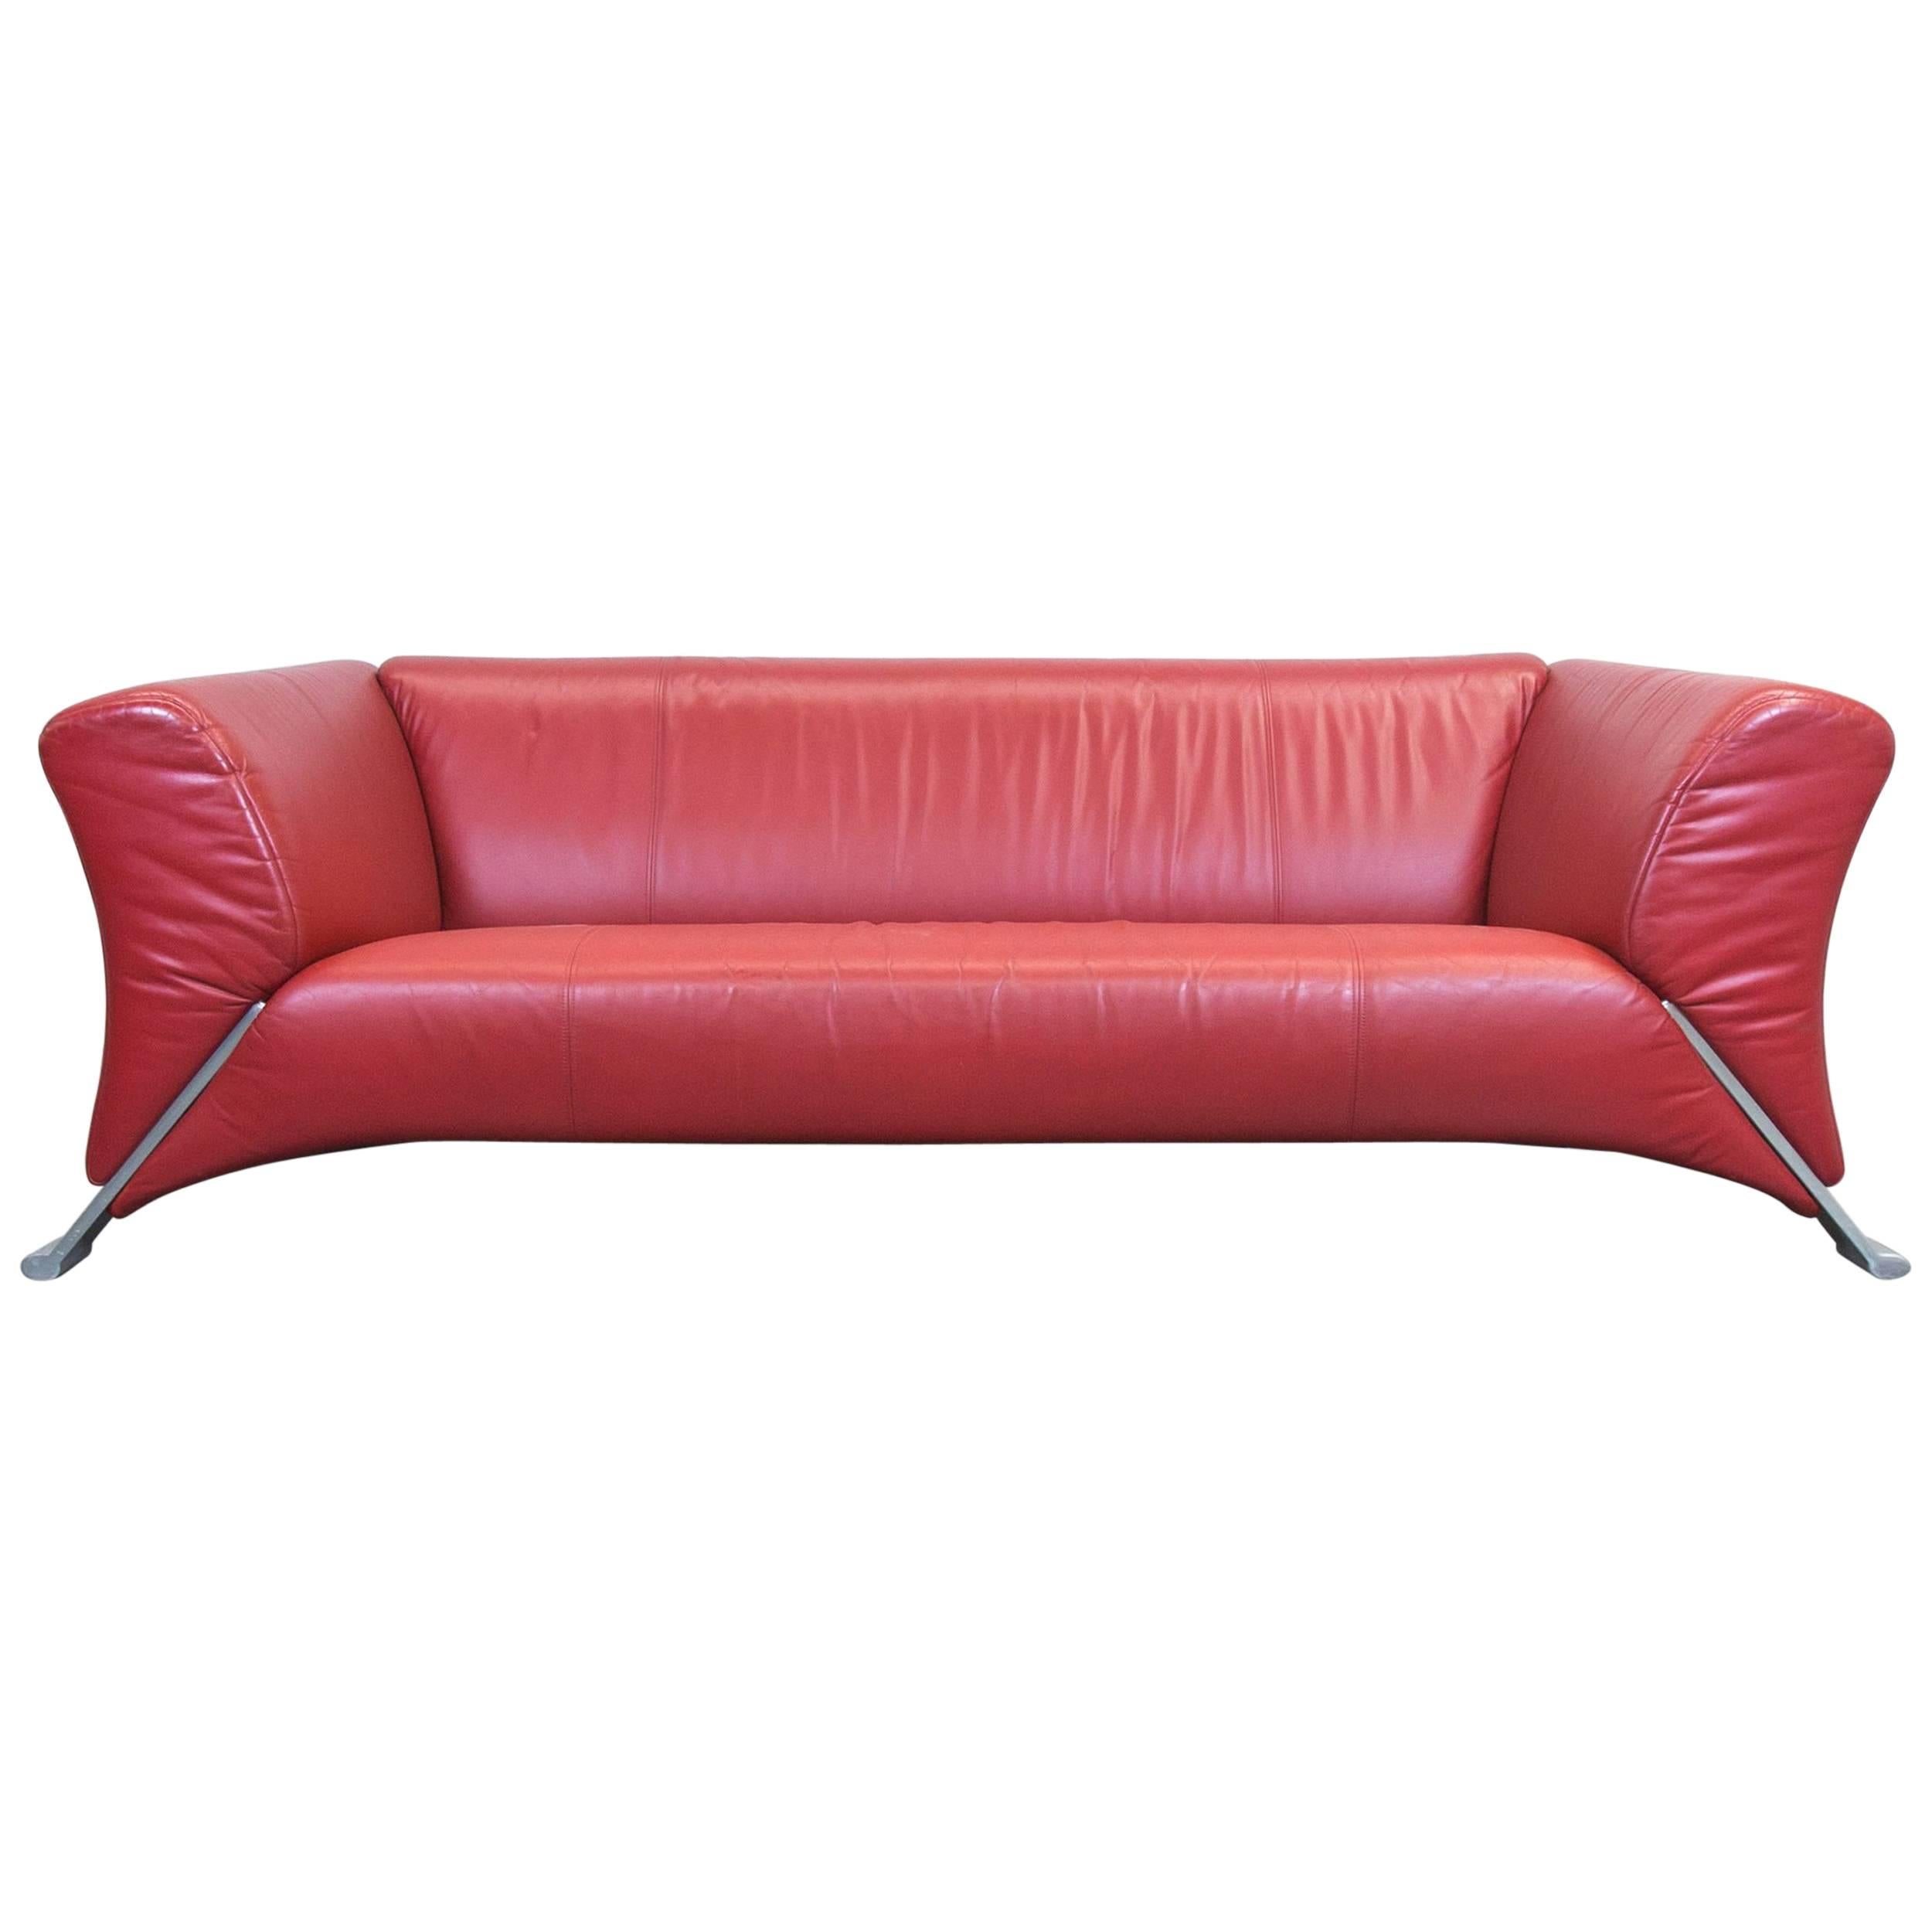 Rolf Benz 322 Designer Leather Sofa Red Three-Seat Couch Modern